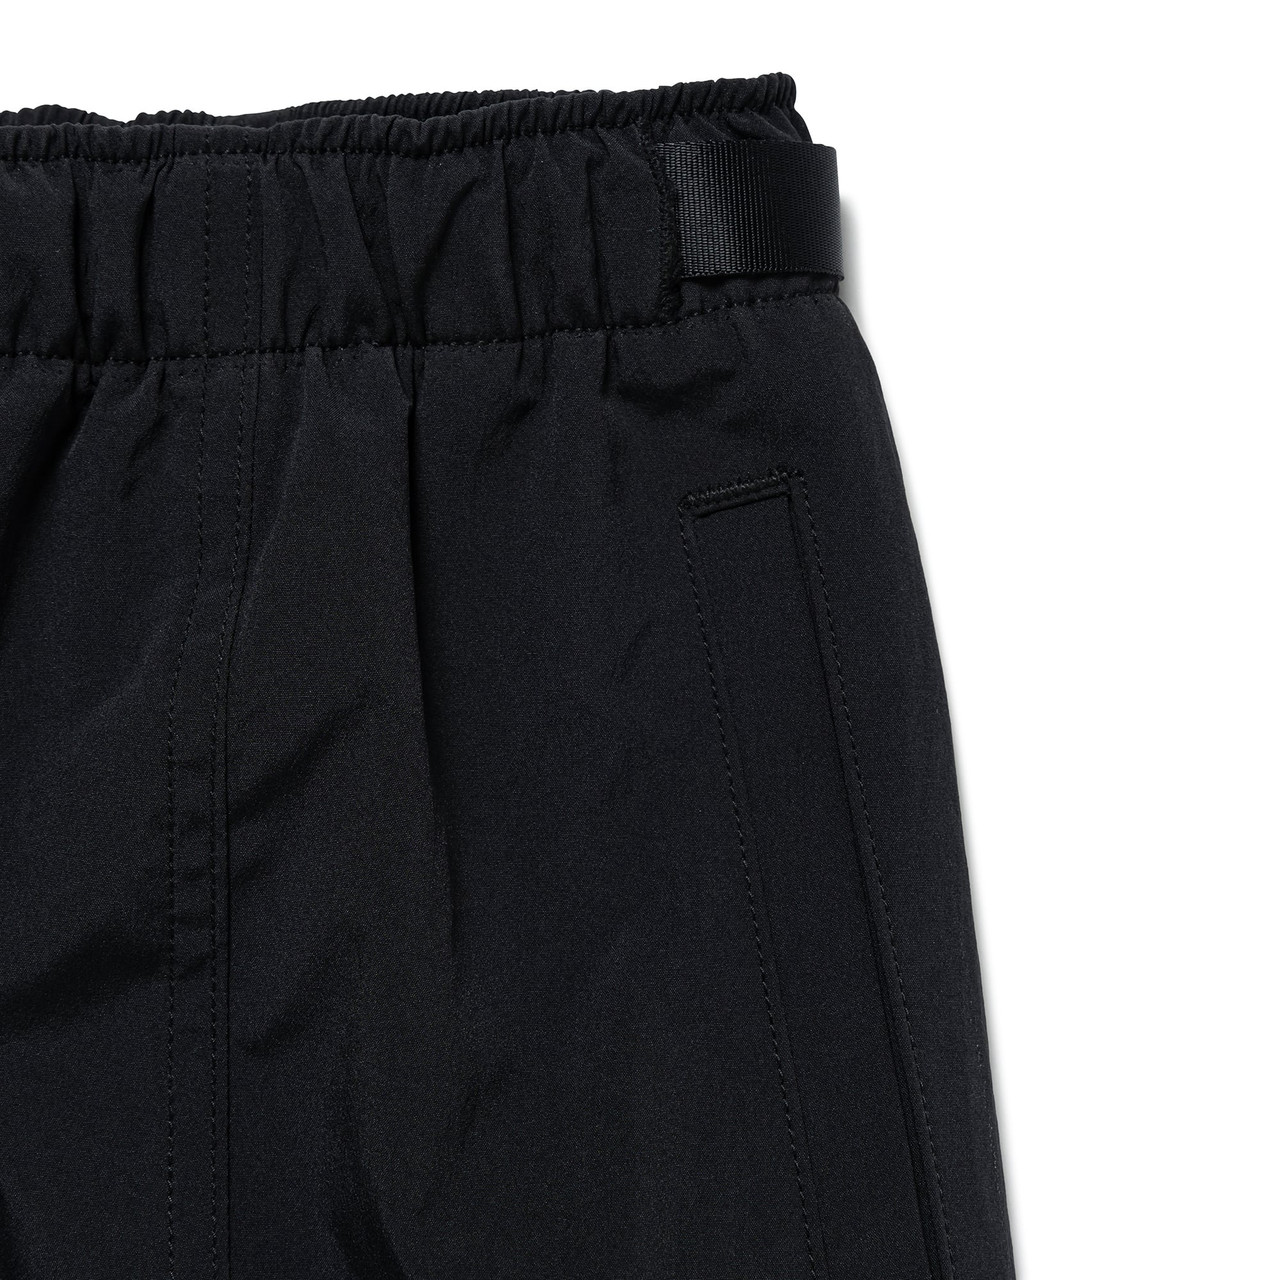 WTAPS Trousers SPST2002 / TROUSERS / POLY. TUSSAH